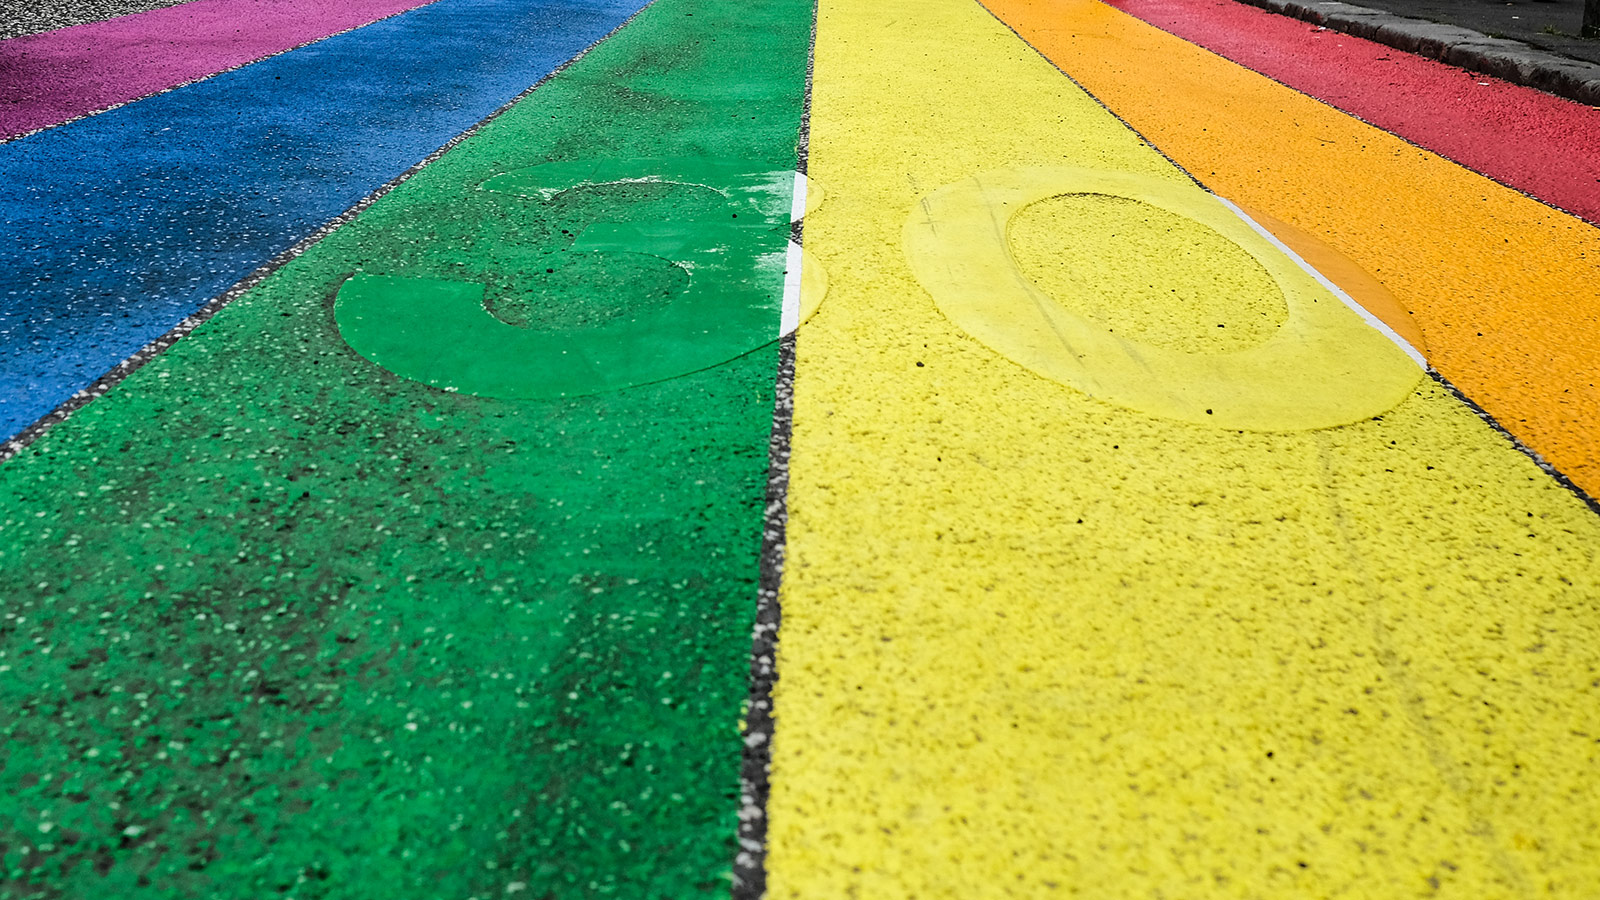 A road covered in paint in the colours of the rainbow